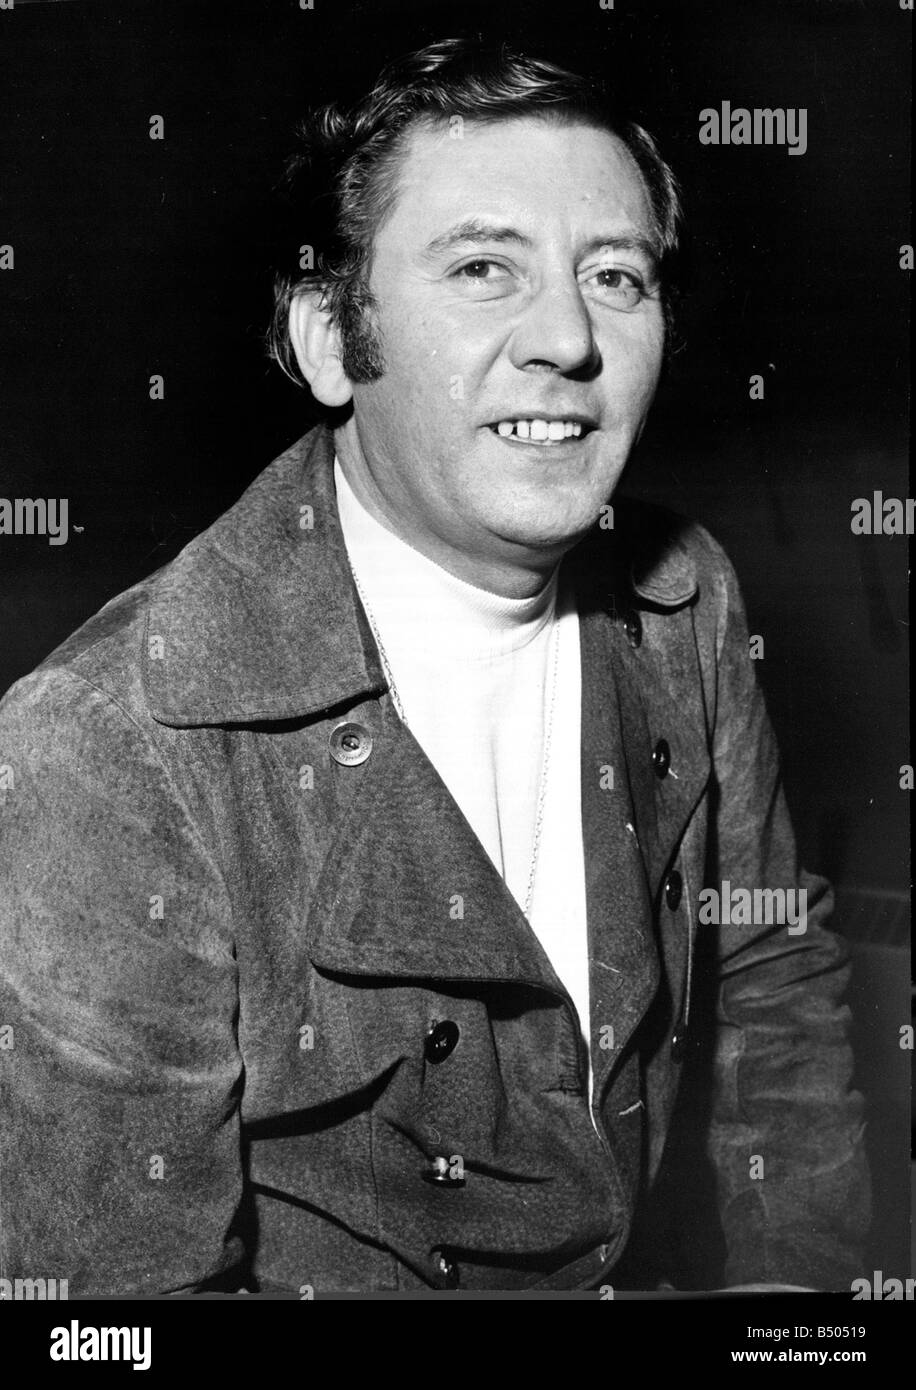 James Beck actor from the BBC TV series Dads Army. James plays the character of Joe the Spiv;P73 36;10/1/1973;Monty McKay; Stock Photo